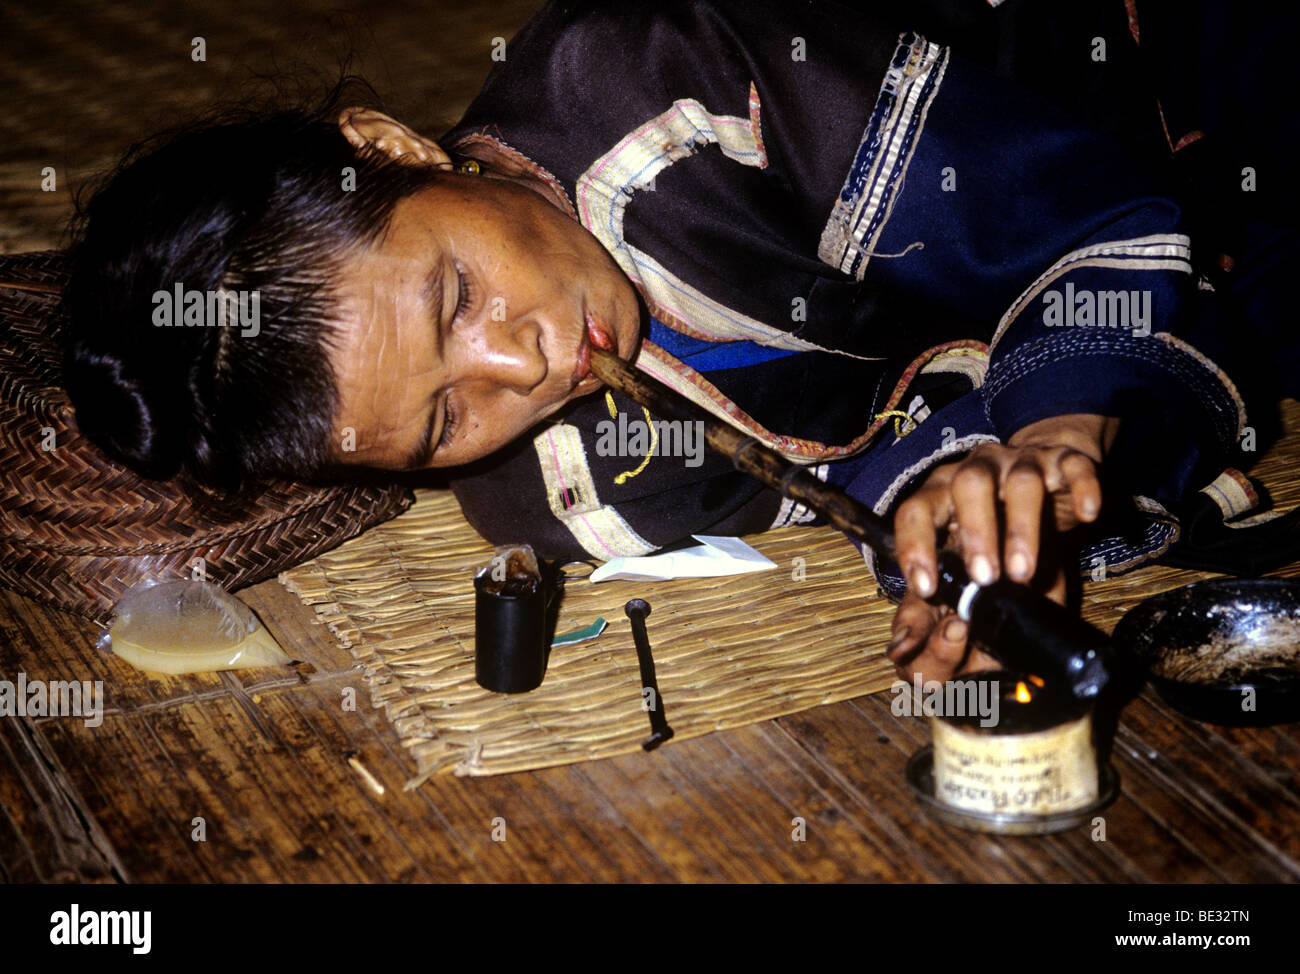 2695. Woman of the Black Lahu Hill Tribe smoking opium, Northern Thailand. Stock Photo